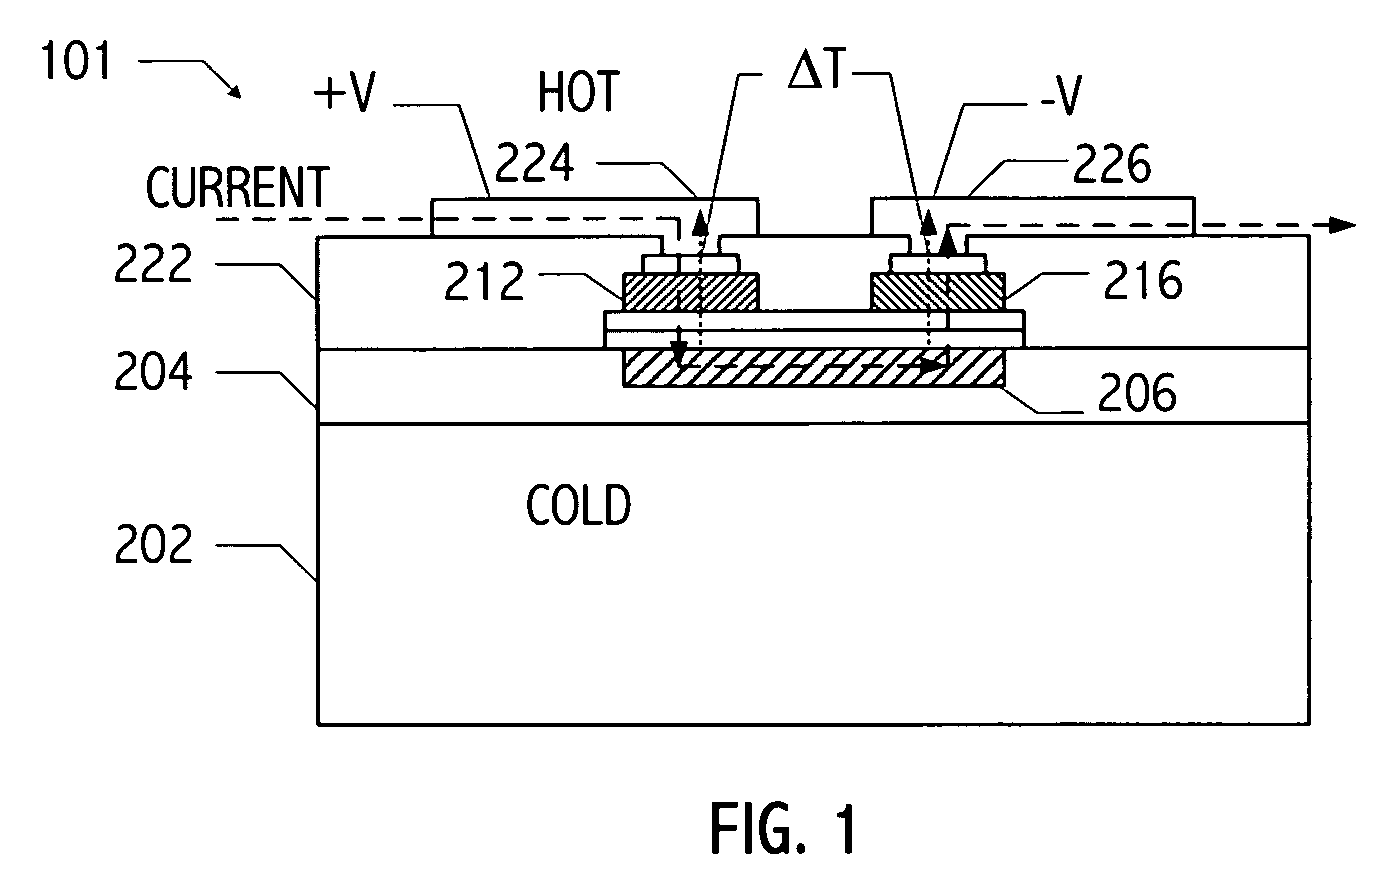 Method for forming a thin-film thermoelectric device including a phonon-blocking thermal conductor